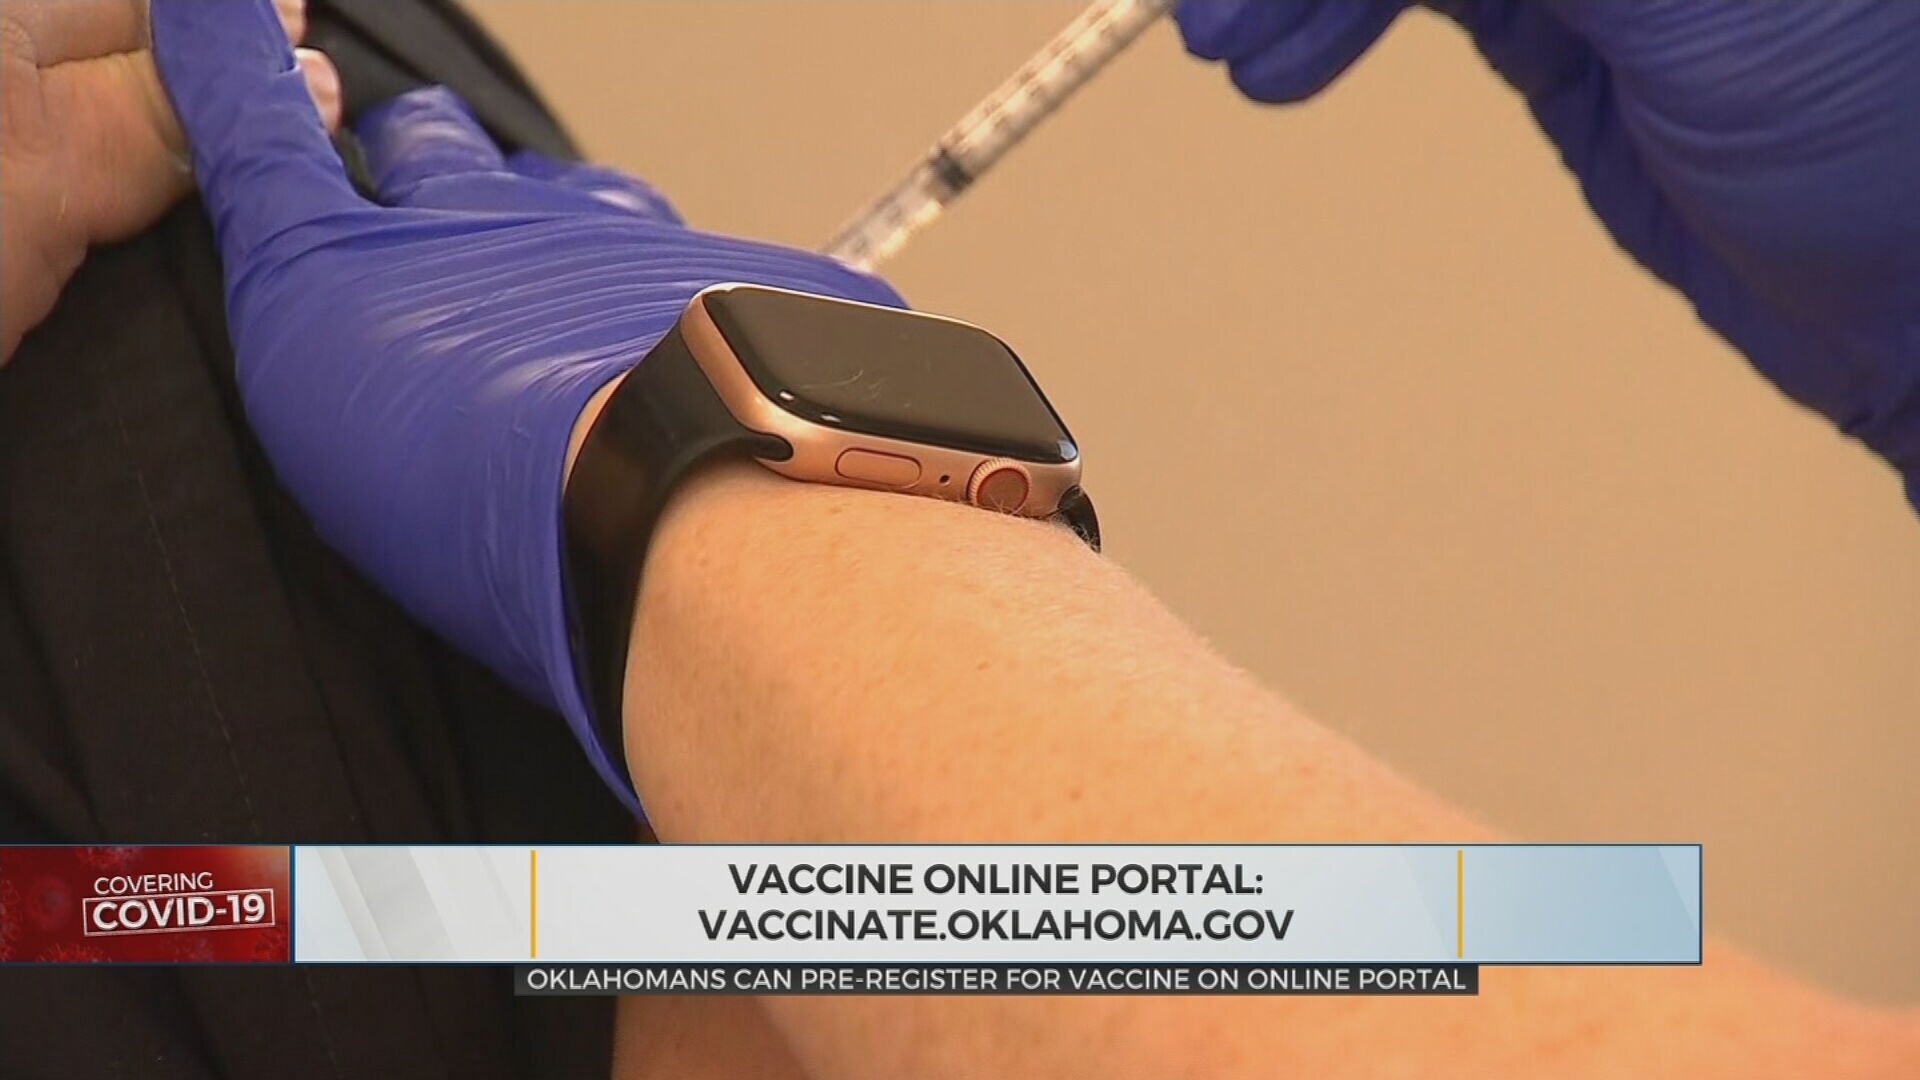 State Health Department Launches Online Portal For Registration, COVID-19 Vaccine Appointments 